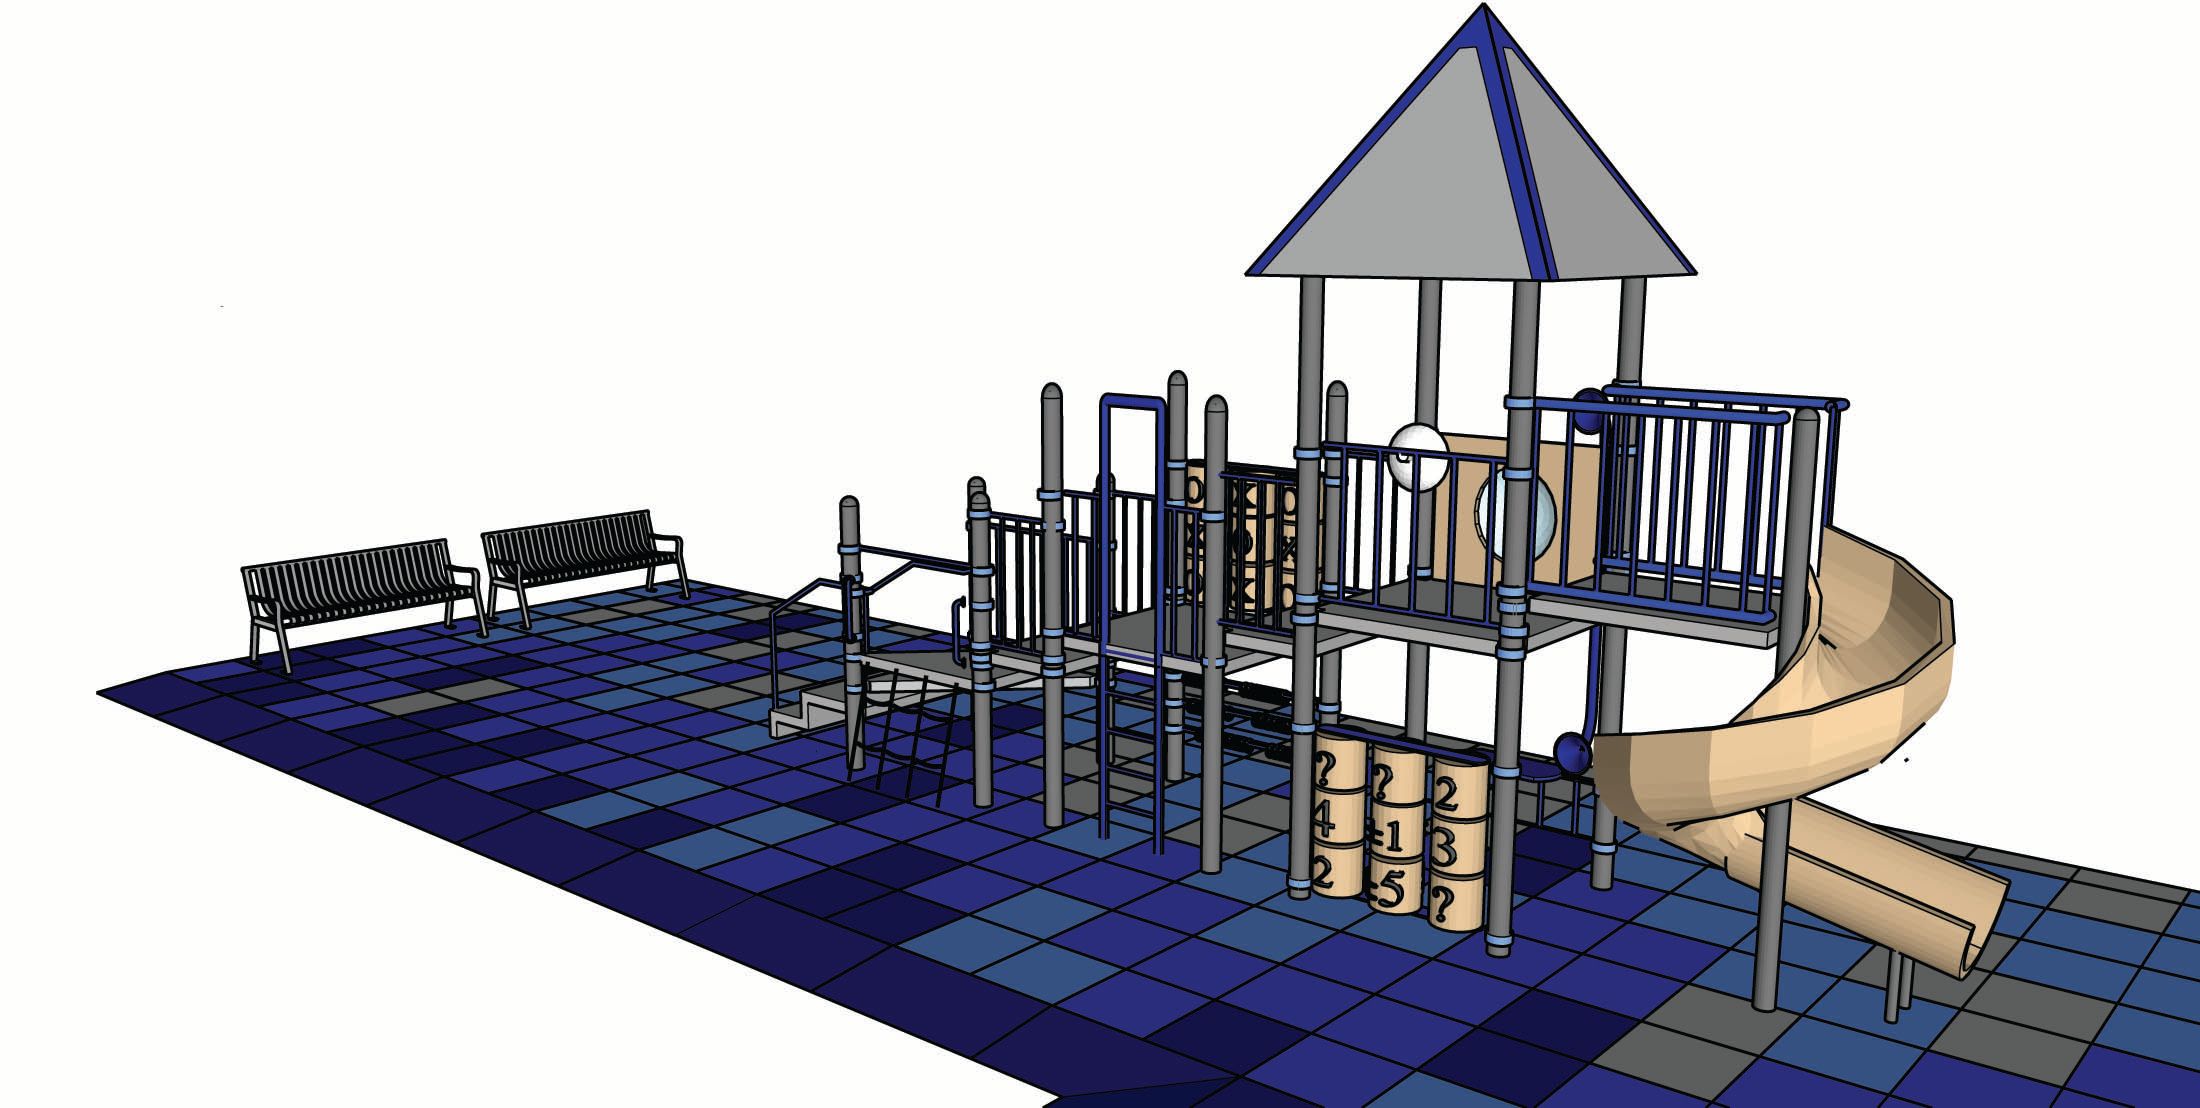 UNITY = Playground Tile Design with Play Structure inserted